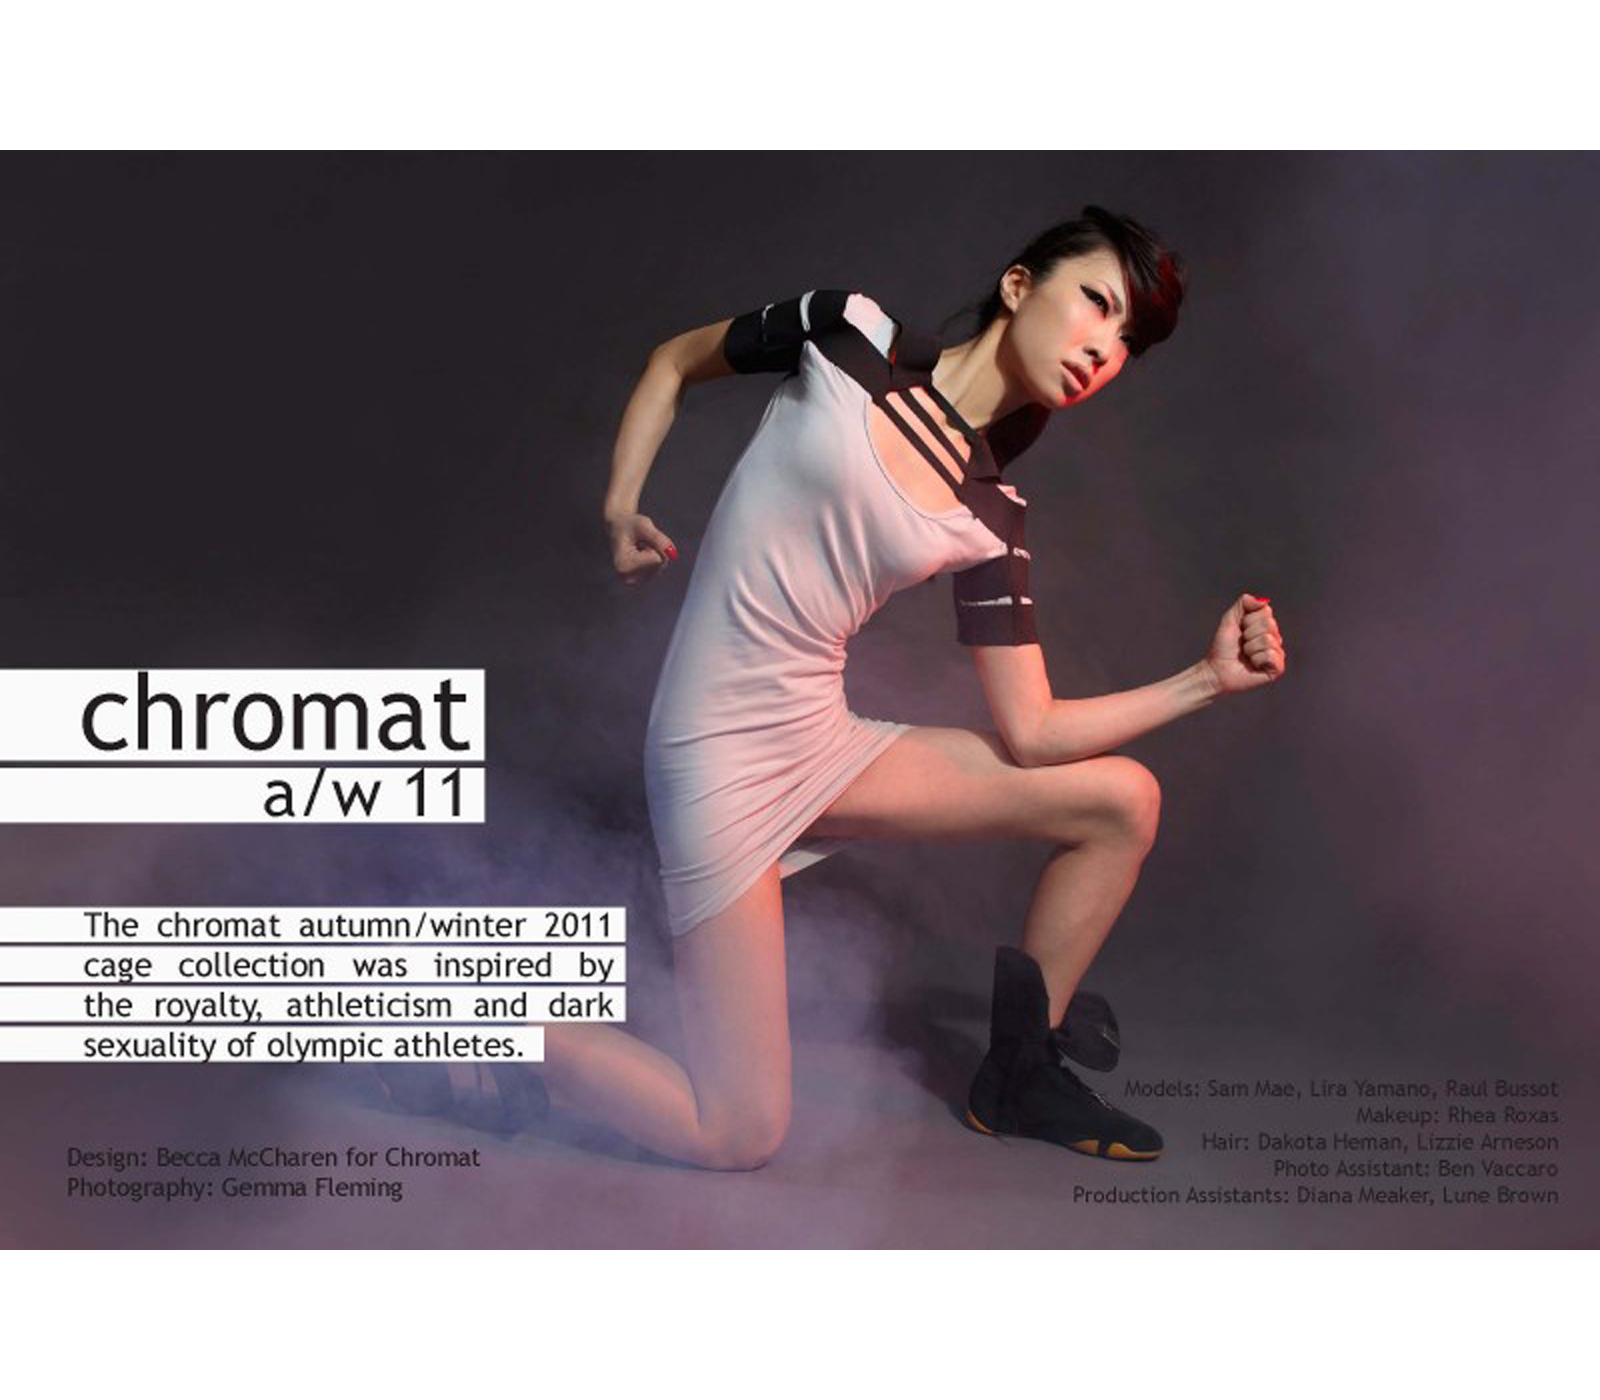 Chromat-AW11-Lookbook_Page_02-800x550 copy.png